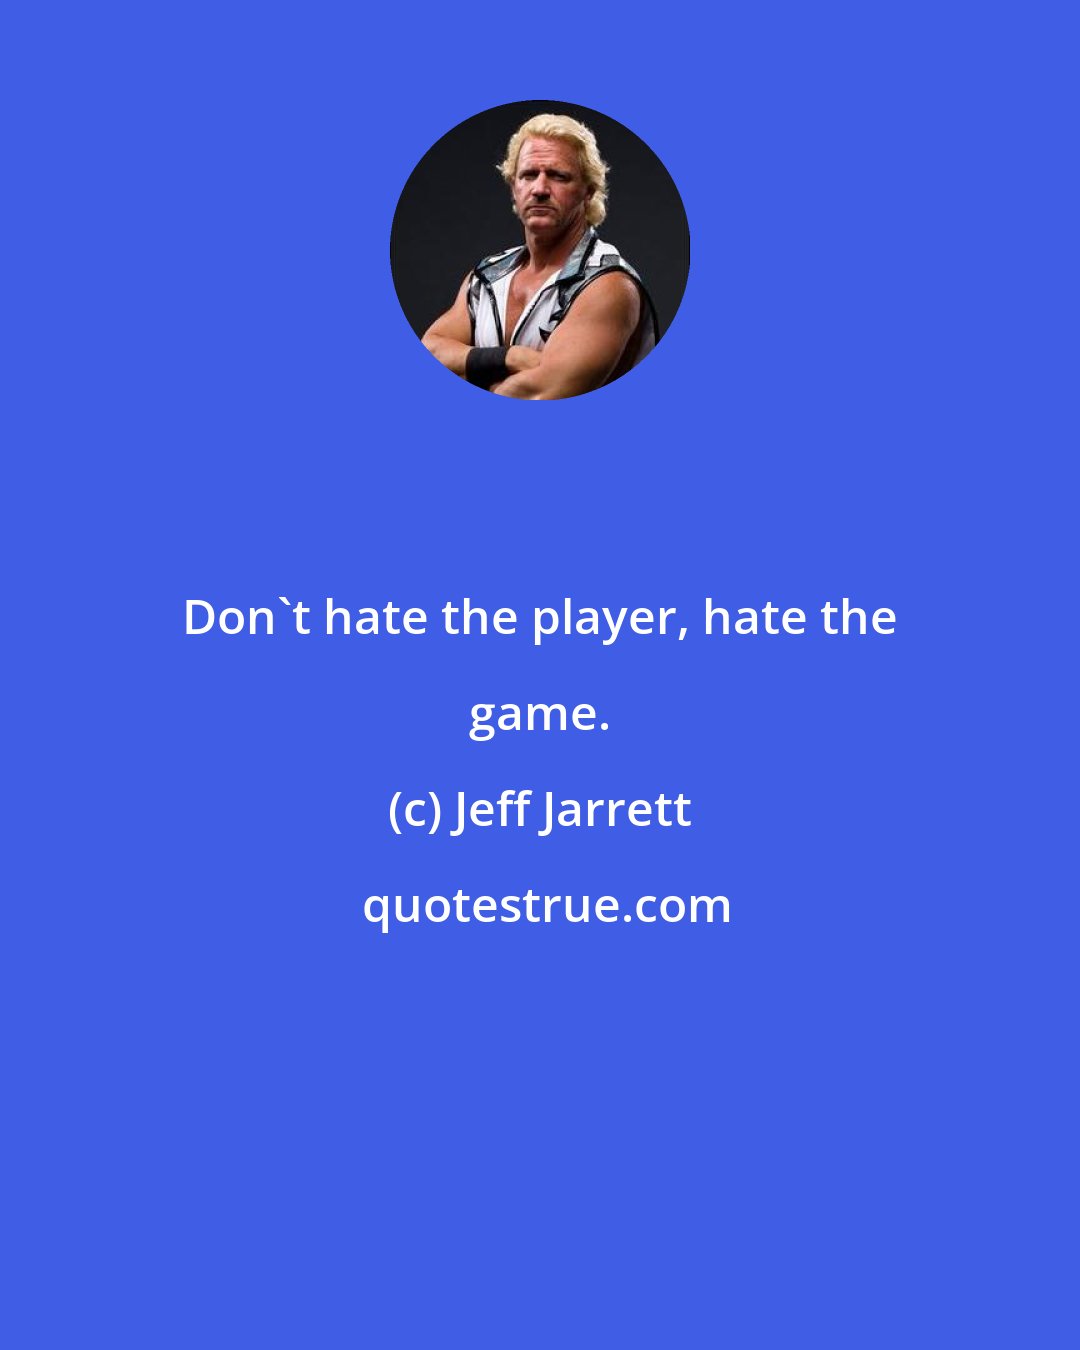 Jeff Jarrett: Don't hate the player, hate the game.